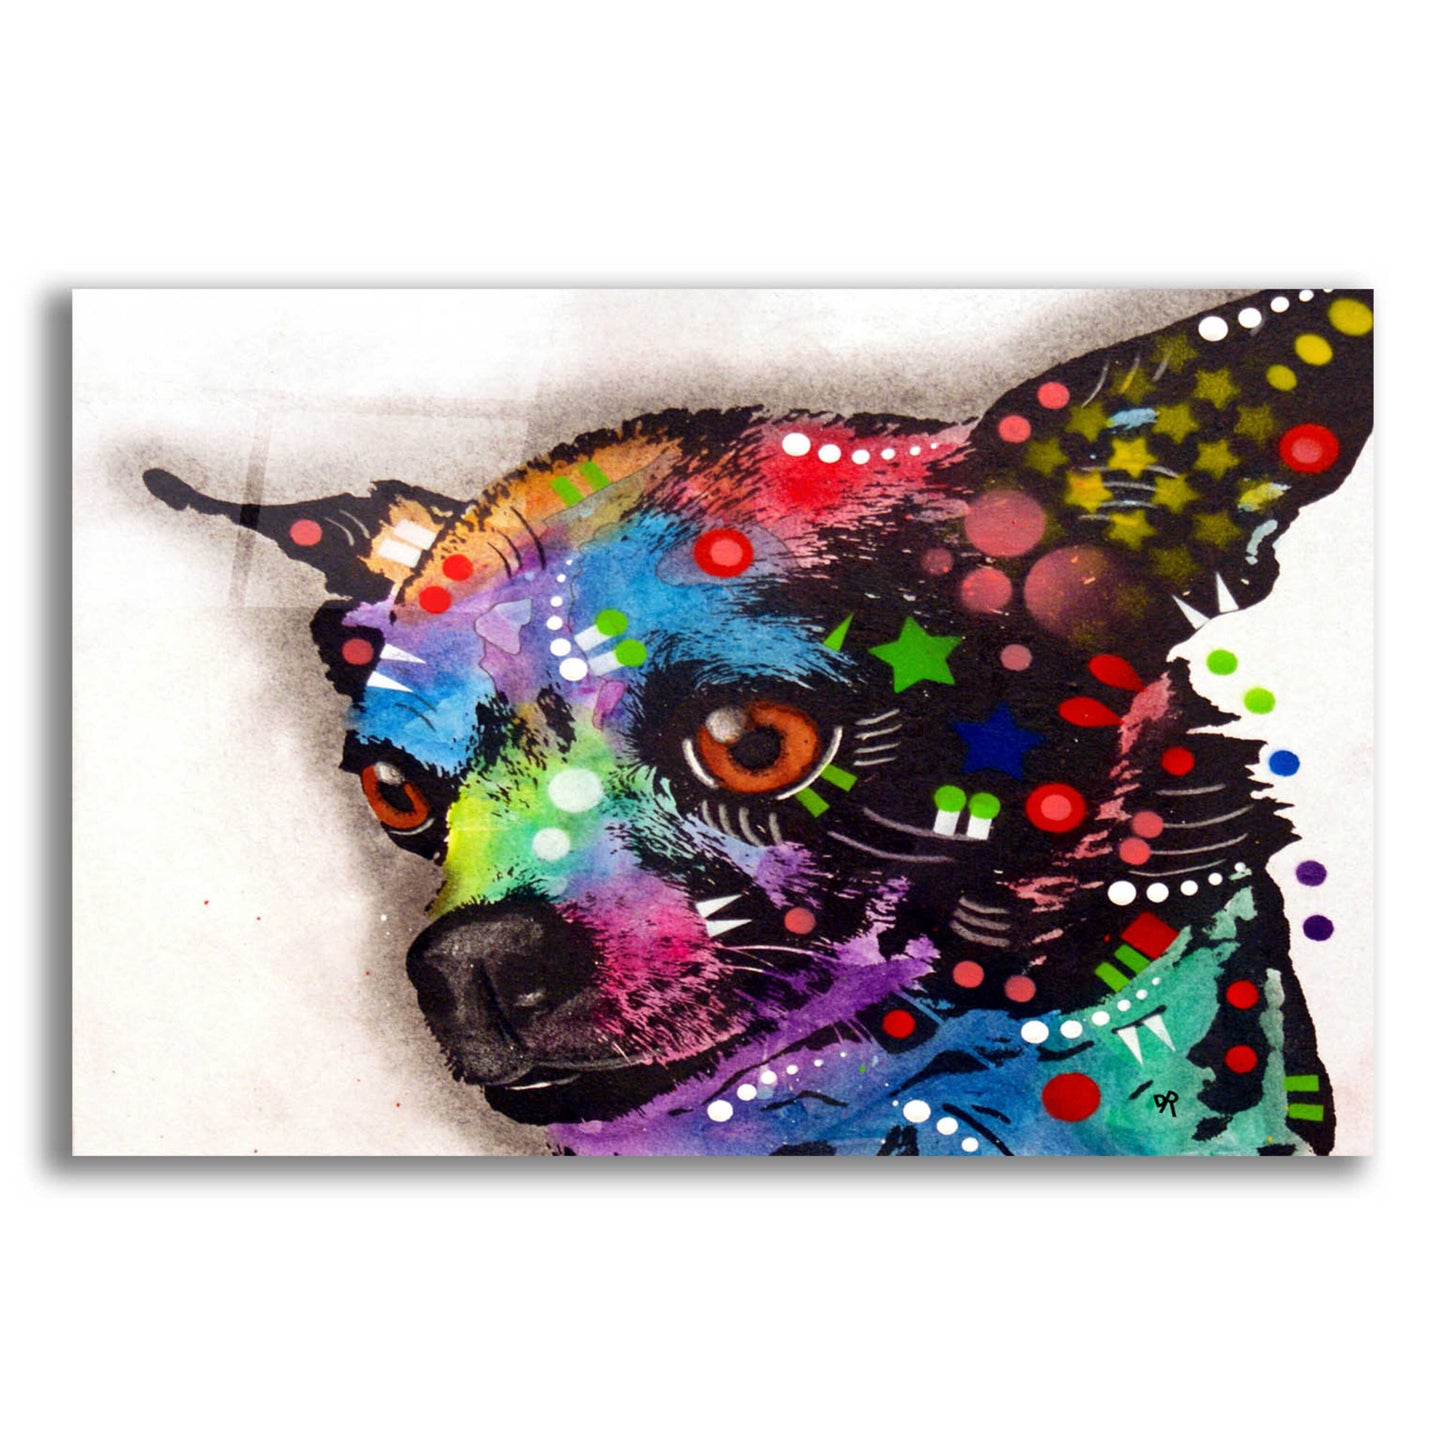 Epic Art 'CHICHI' by Dean Russo, Acrylic Glass Wall Art